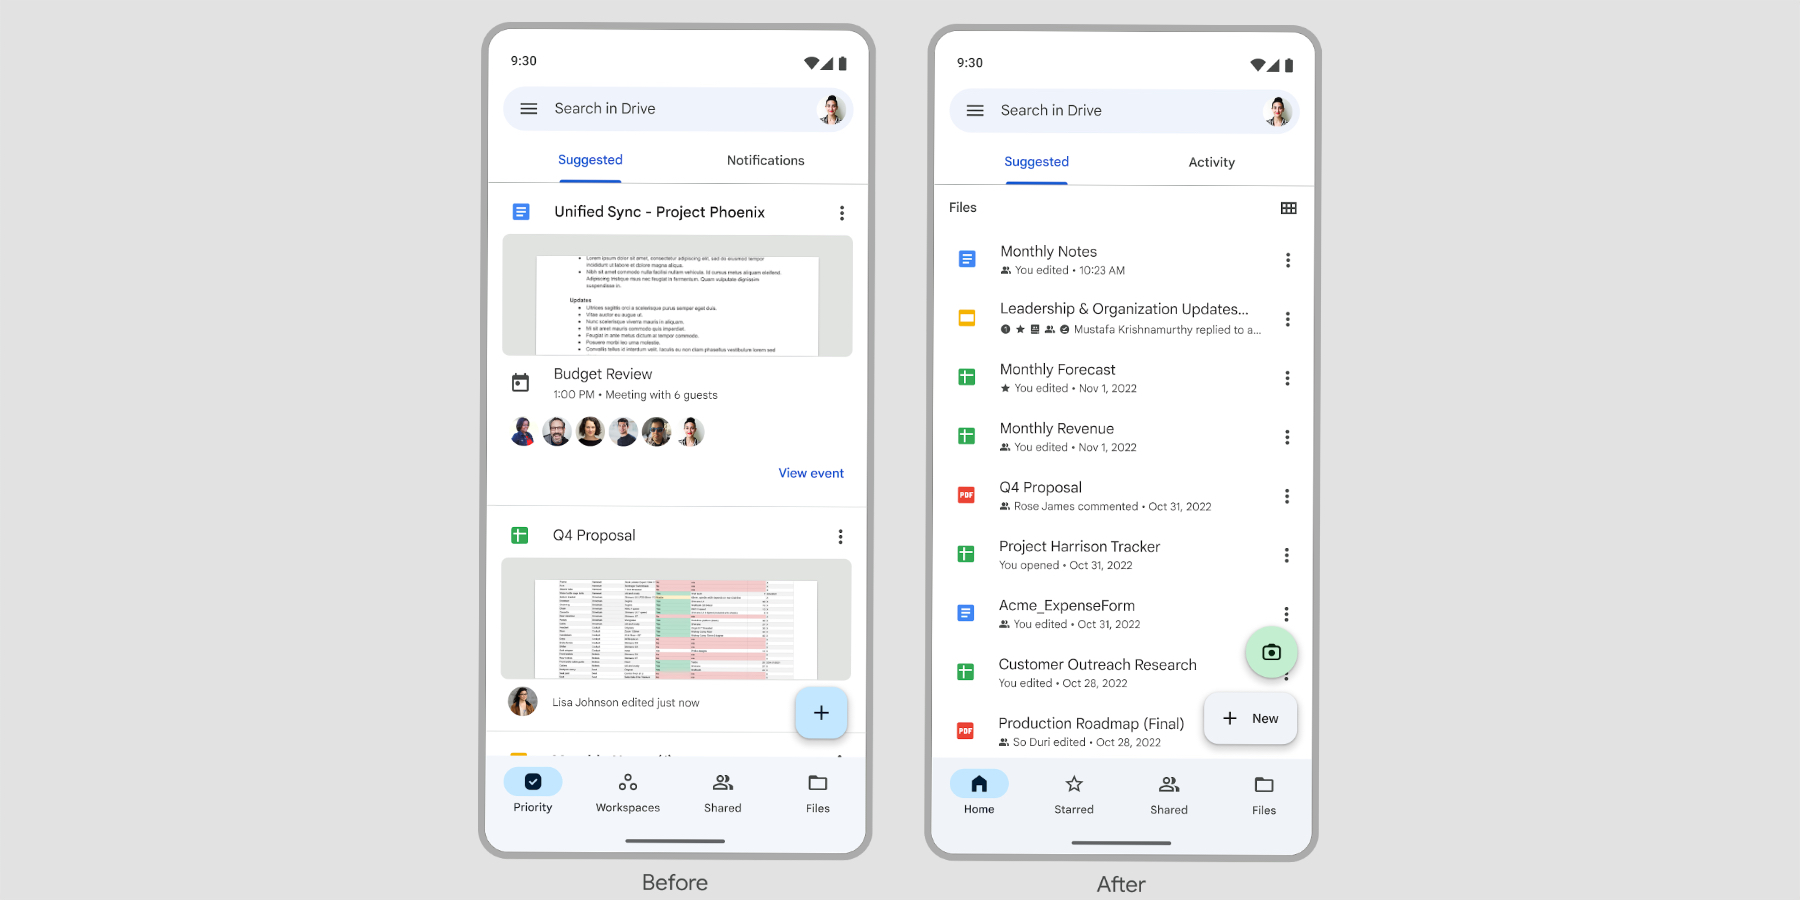 Google Drive gets a new design for iOS and Android